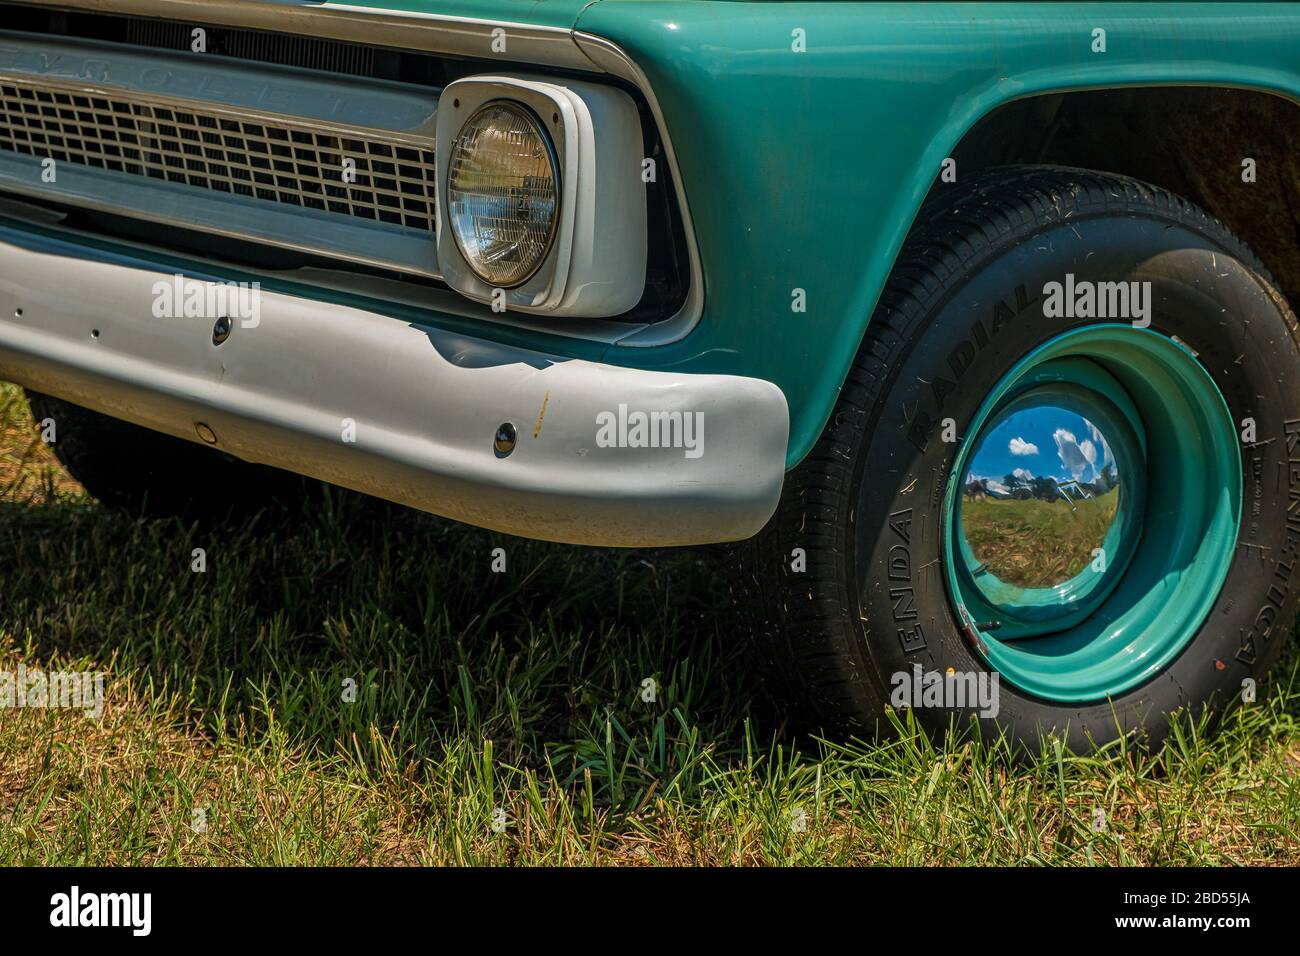 Wheel and Fender of Chevy Truck Stock Photo